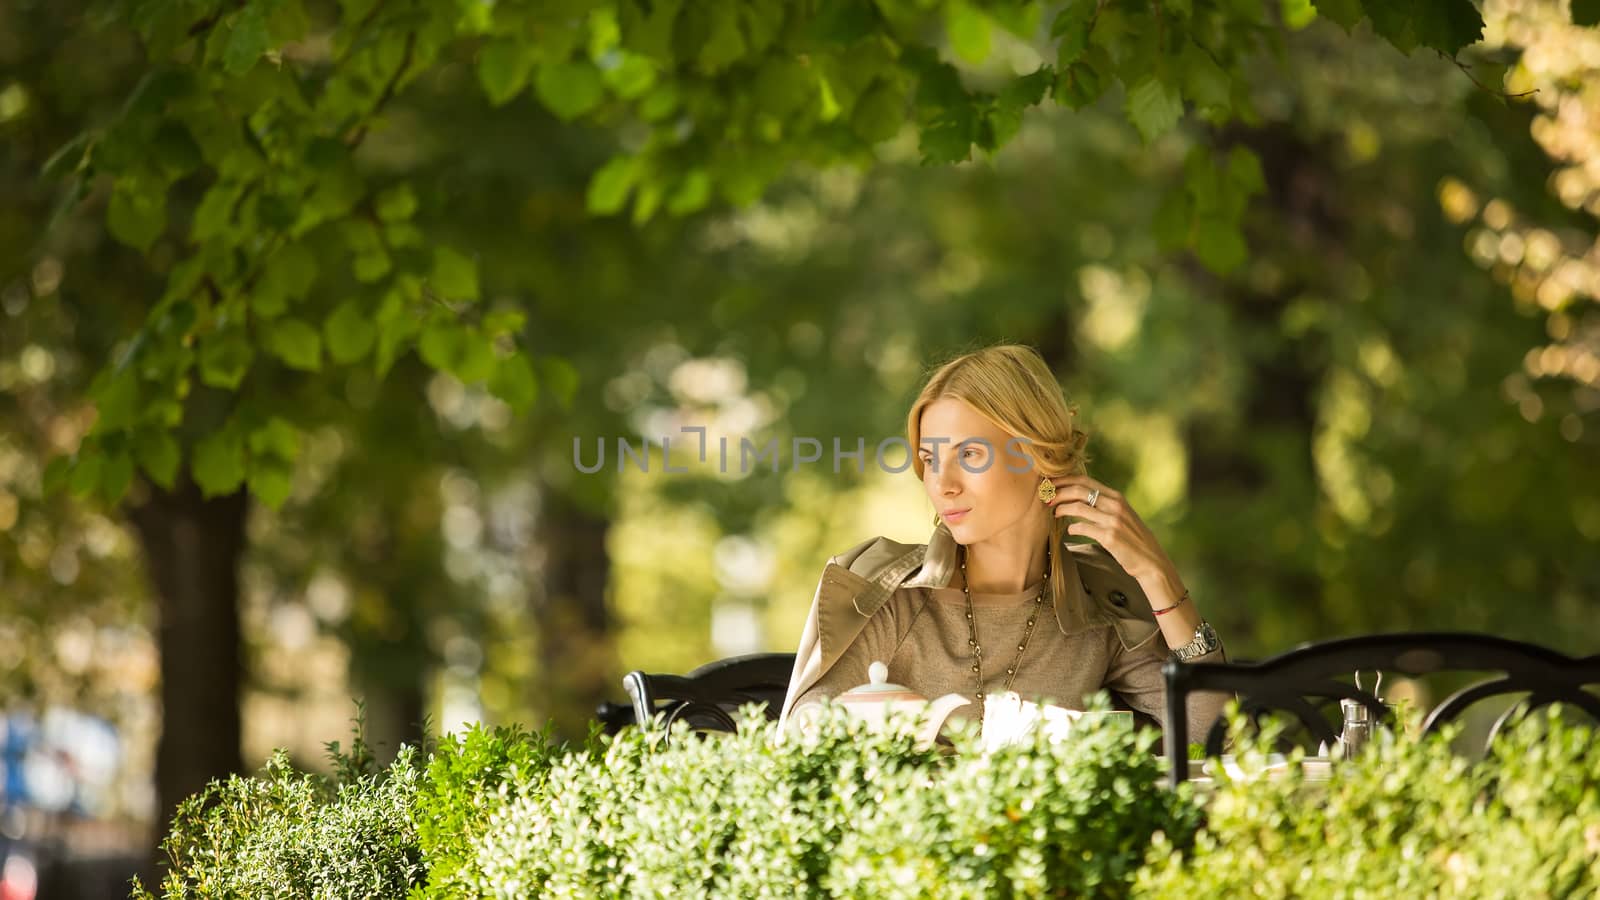 portrait of a beautiful young woman in a spring park. pictures in warm colors